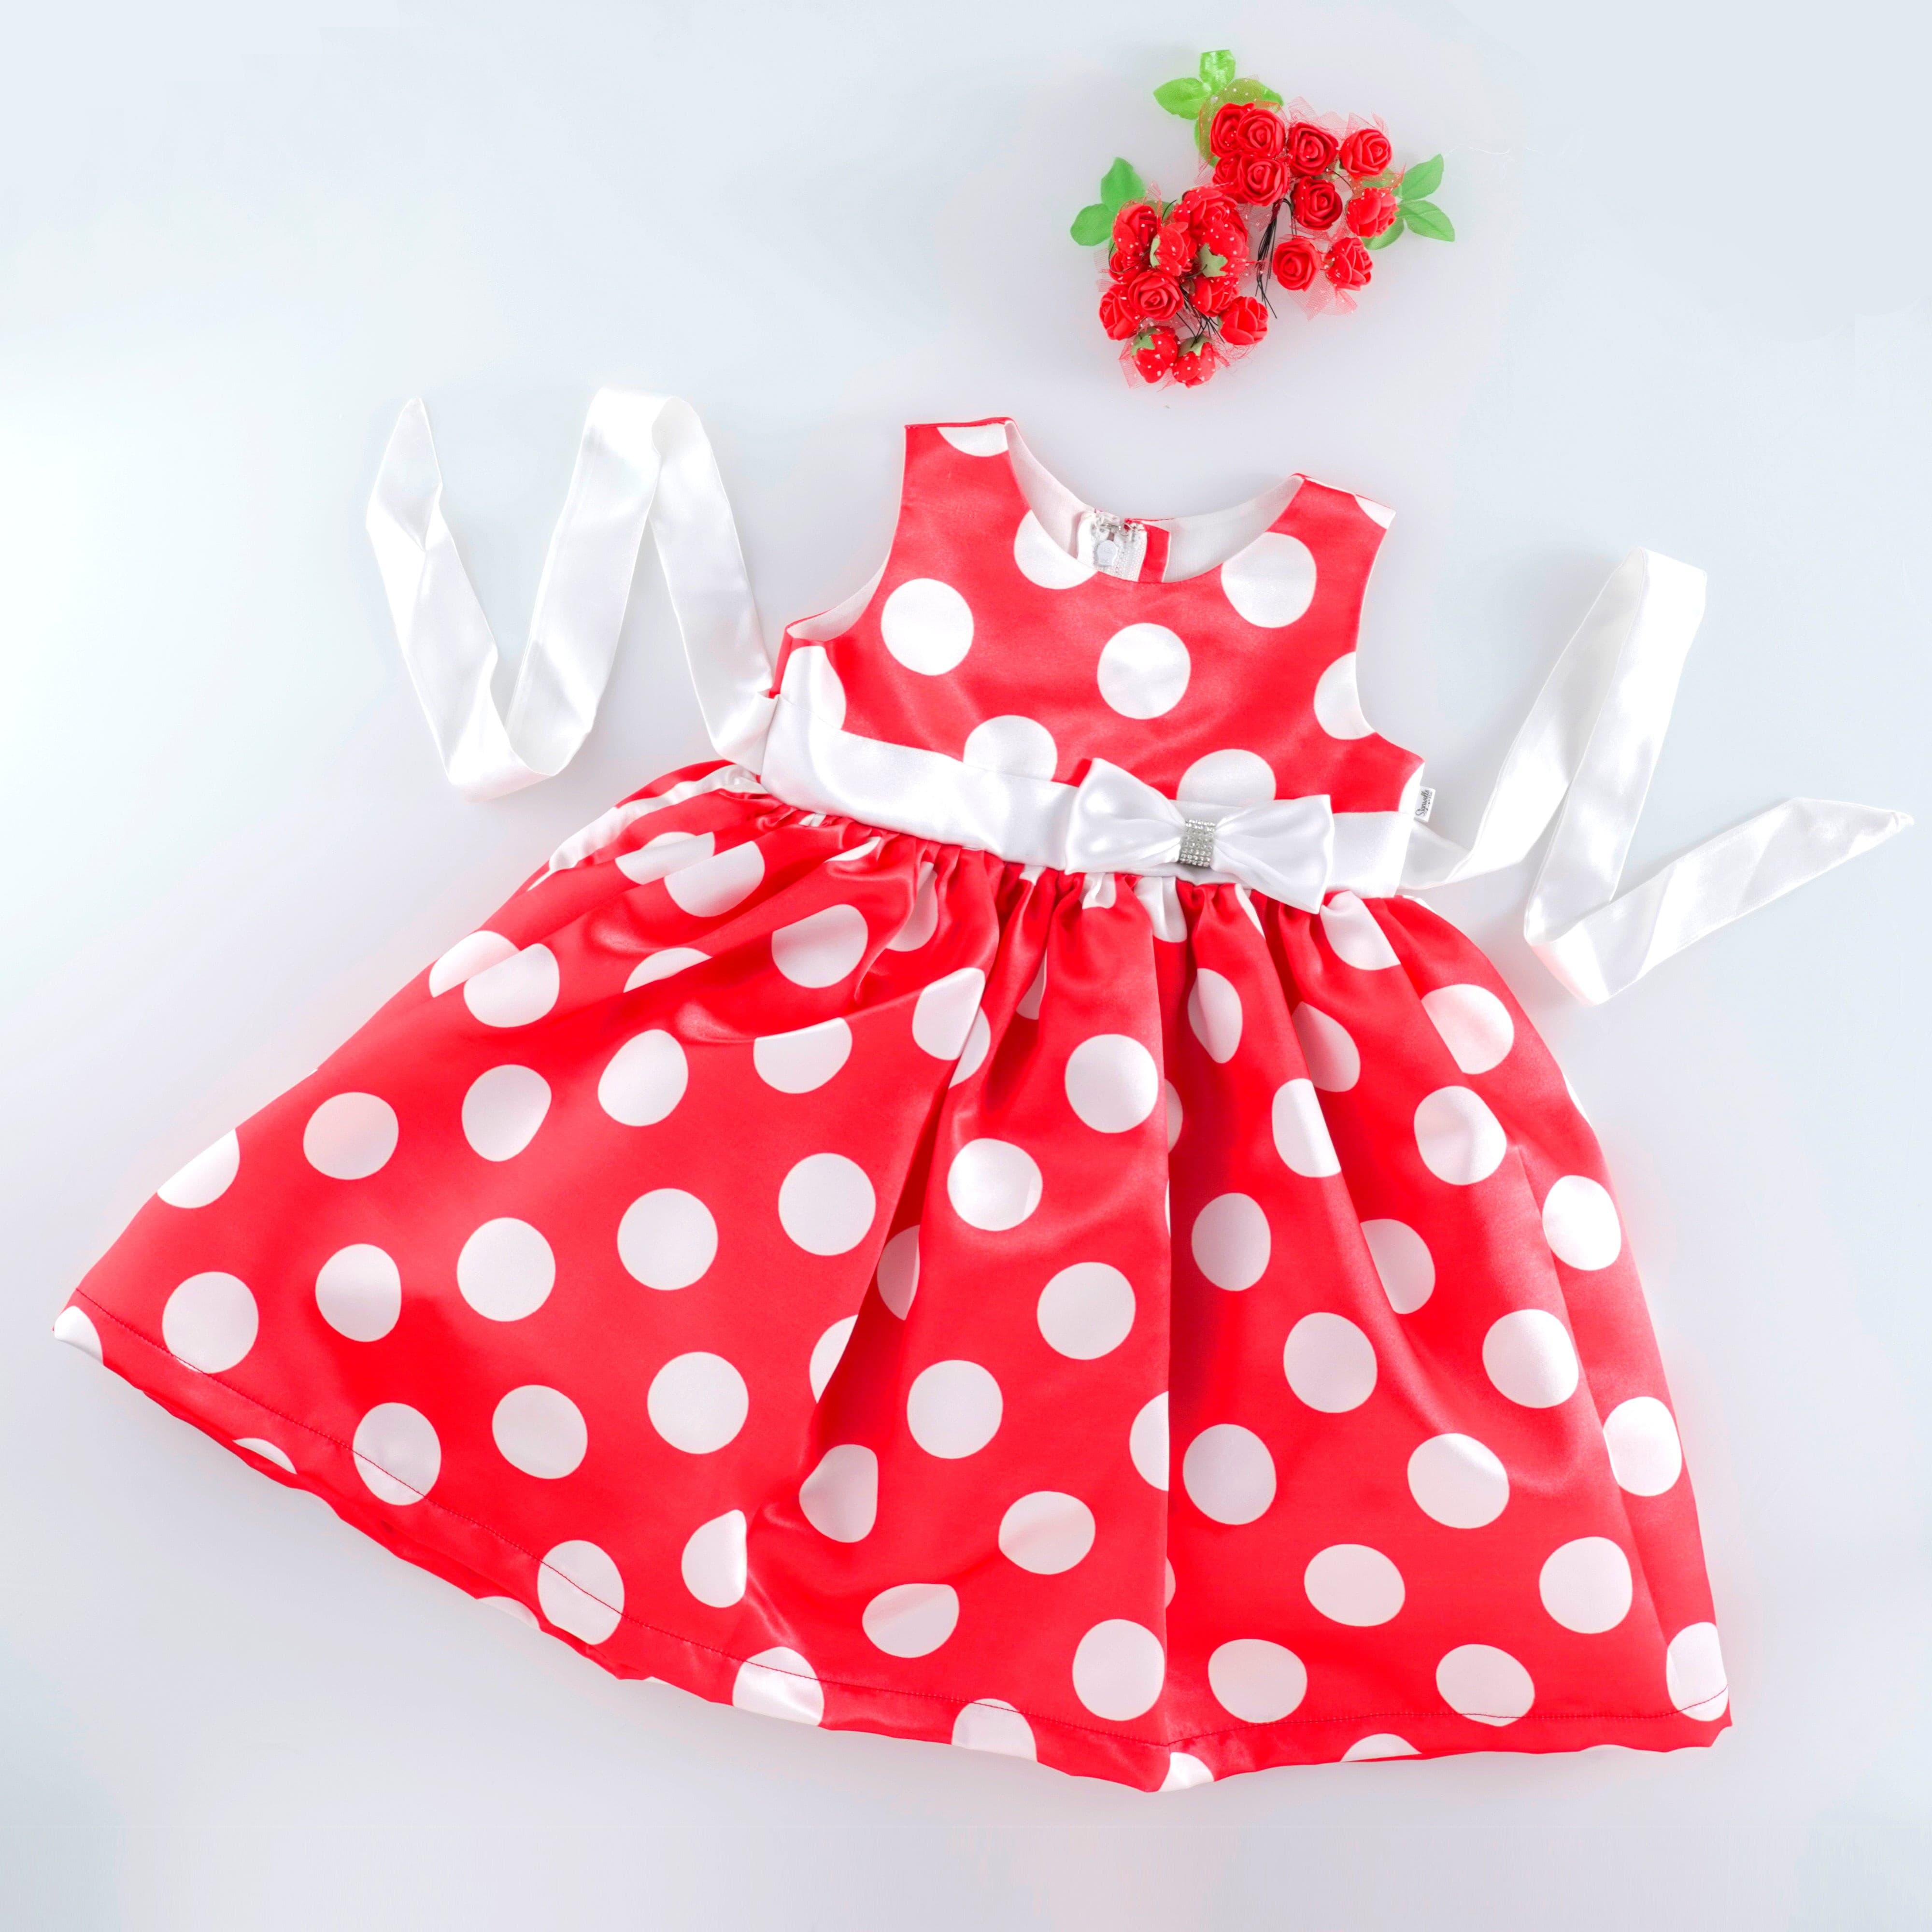 NNJXD Girl Dress Kids Ruffles Lace Party Wedding Dresses Size (110) 3-4  Years Flower Red : Amazon.in: Clothing & Accessories